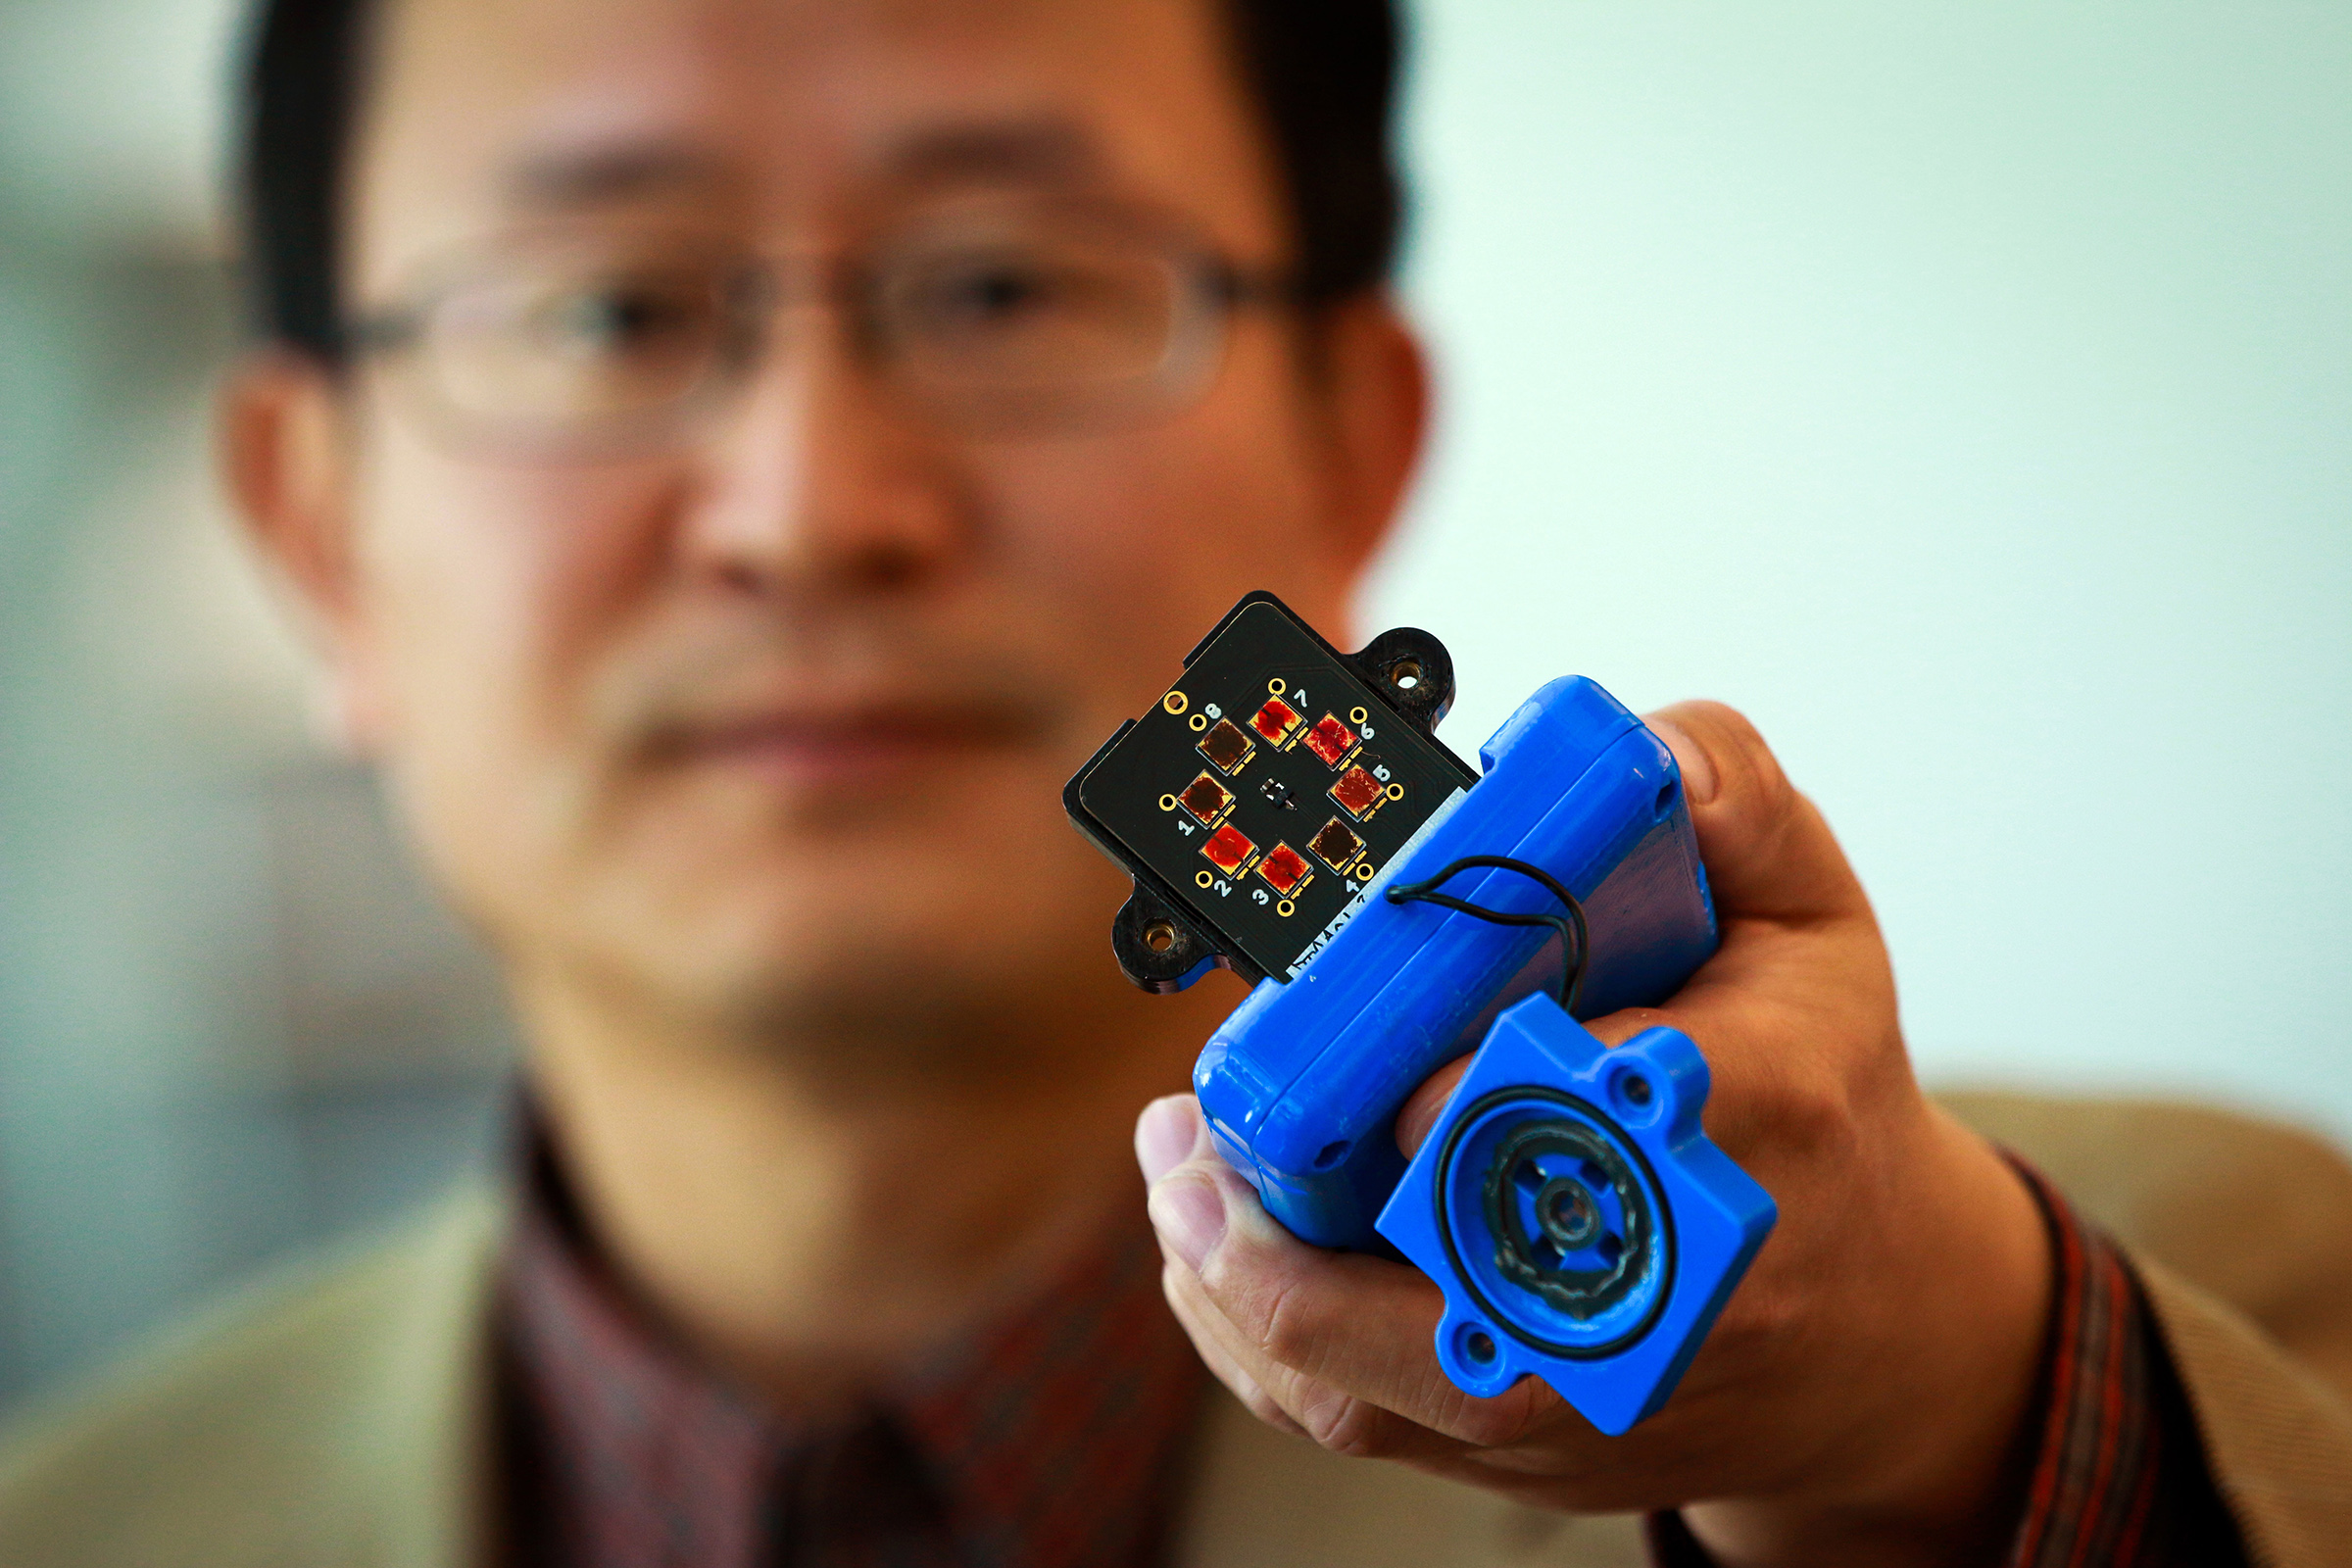 Ling Zang, a University of Utah professor of materials science and engineering, holds a prototype detector that uses a new type of carbon nanotube material for use in handheld scanners to detect explosives, toxic chemicals and illegal drugs. Zang and colleagues developed the new material, which will make such scanners quicker and more sensitive than today’s standard detection devices. Ling’s spinoff company, Vaporsens, plans to produce commercial versions of the new kind of scanner early next year.